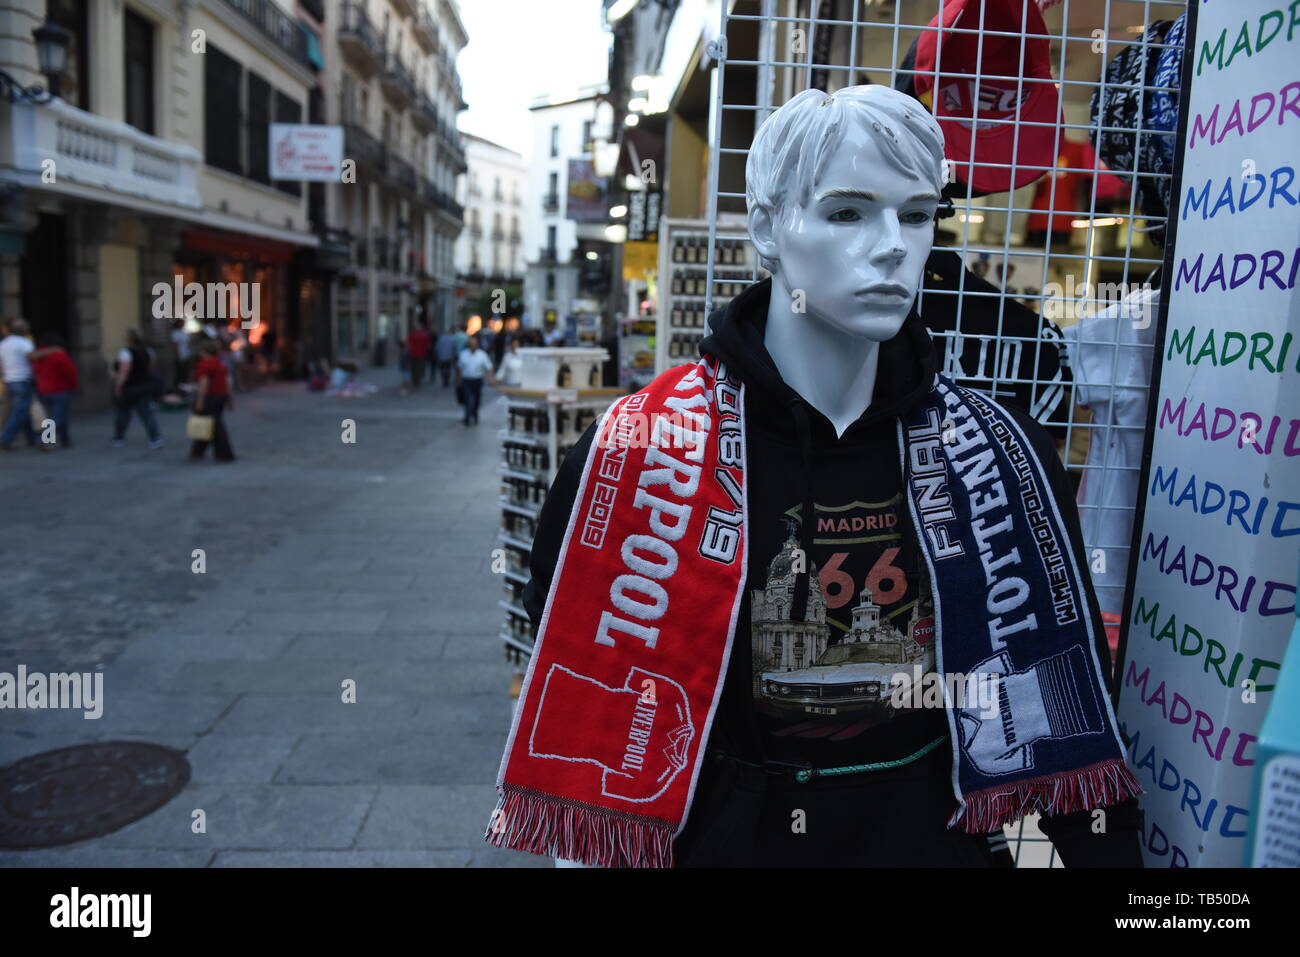 A manikin with the scarf of the 2019 Champions League Final in Madrid. Madrid will host the UEFA Champions League final between Liverpool FC and Tottenham Hotspur on June 1, 2019 at the Wanda Metropolitano Stadium. Stock Photo